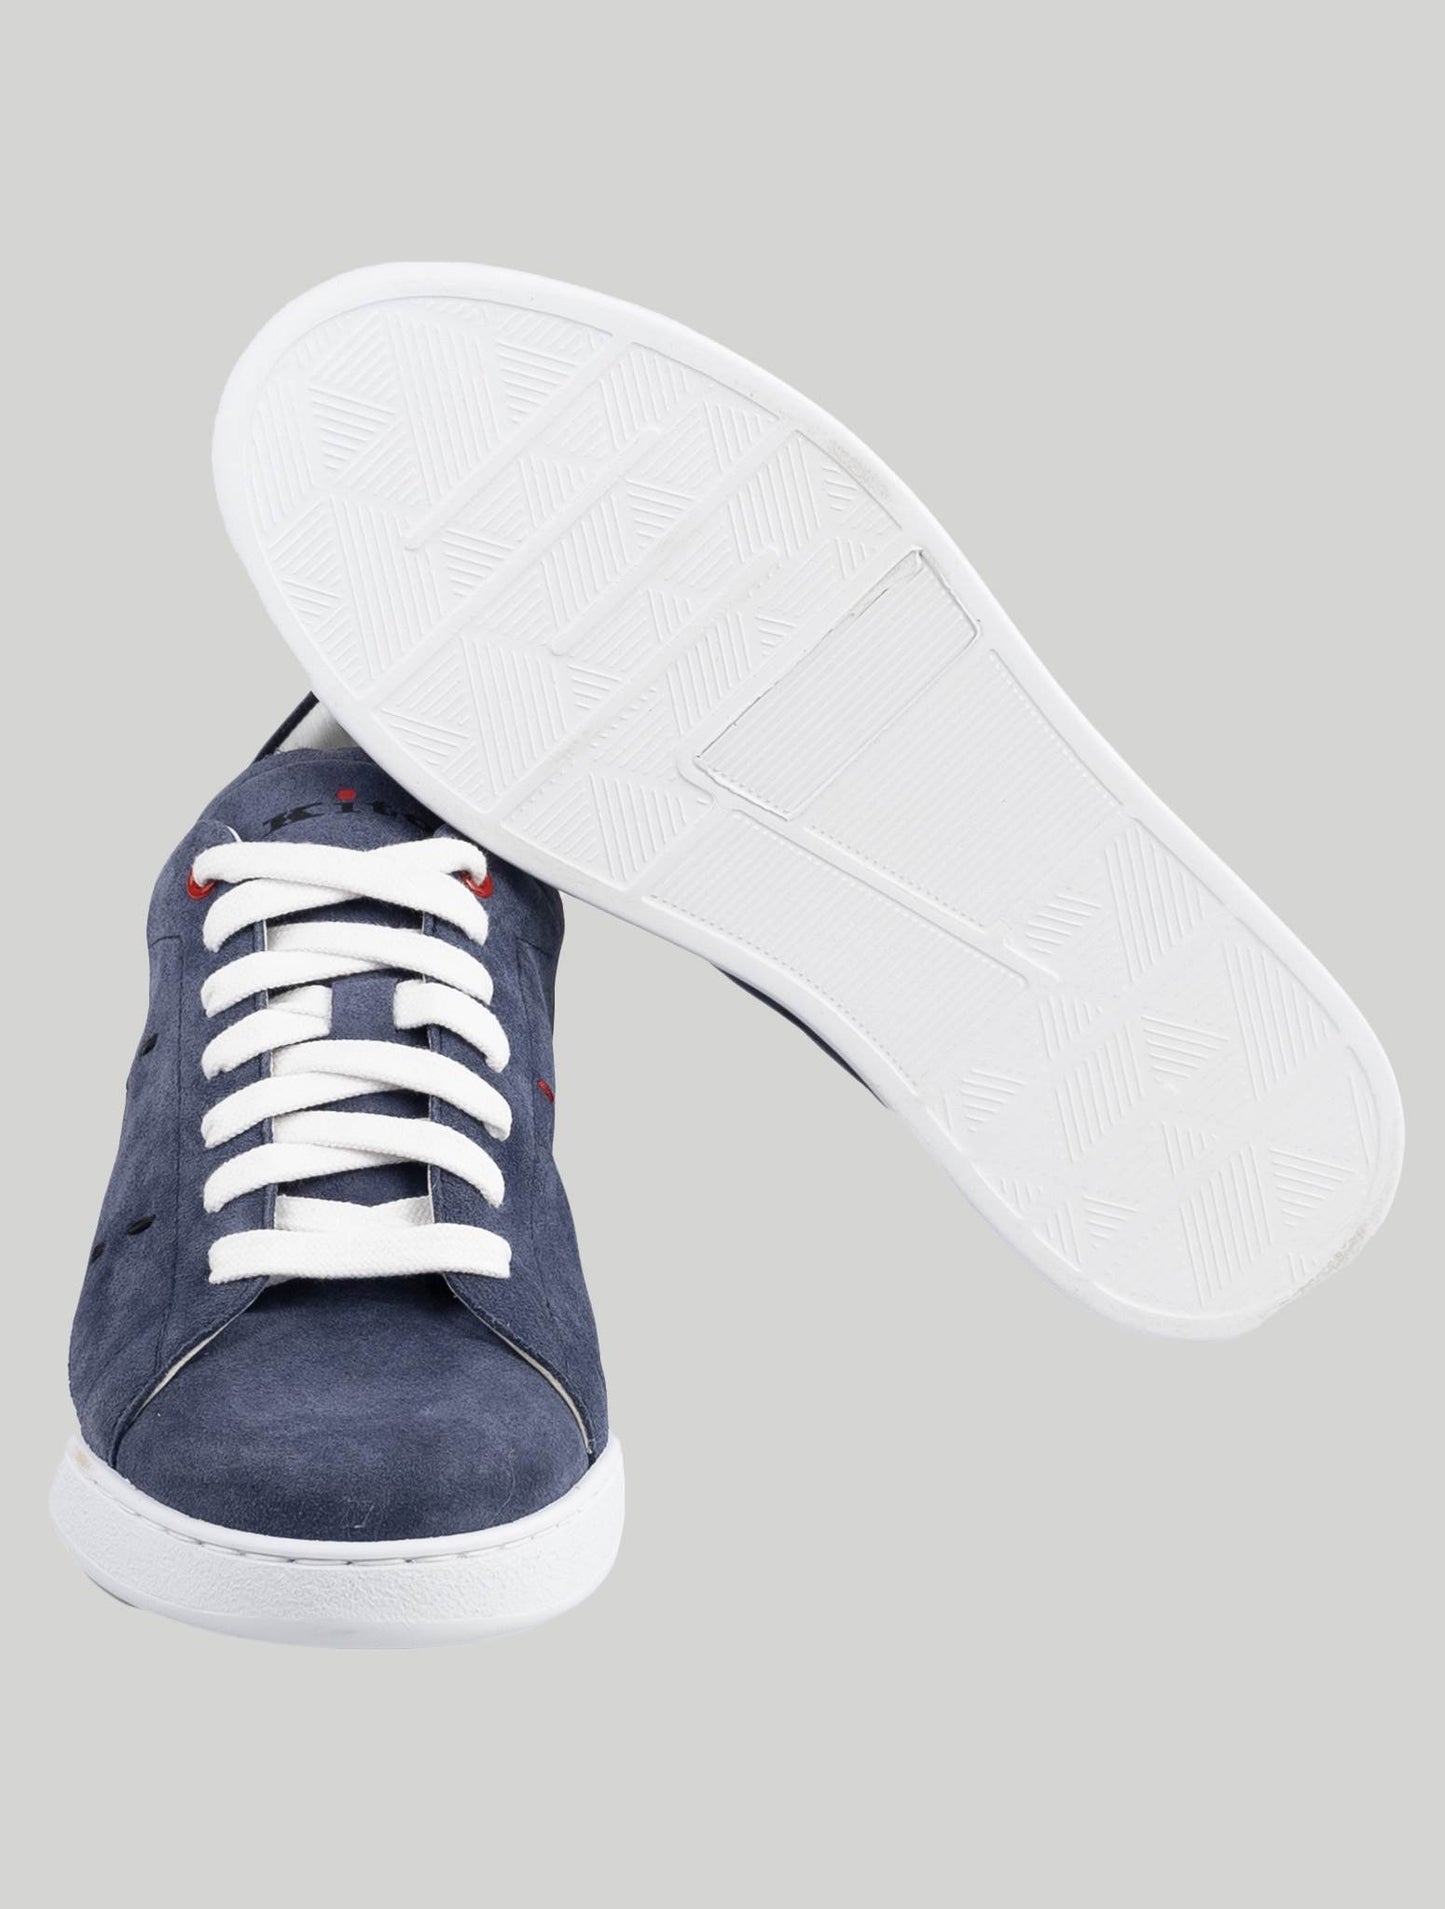 Kiton Blue Leather Suede Sneakers